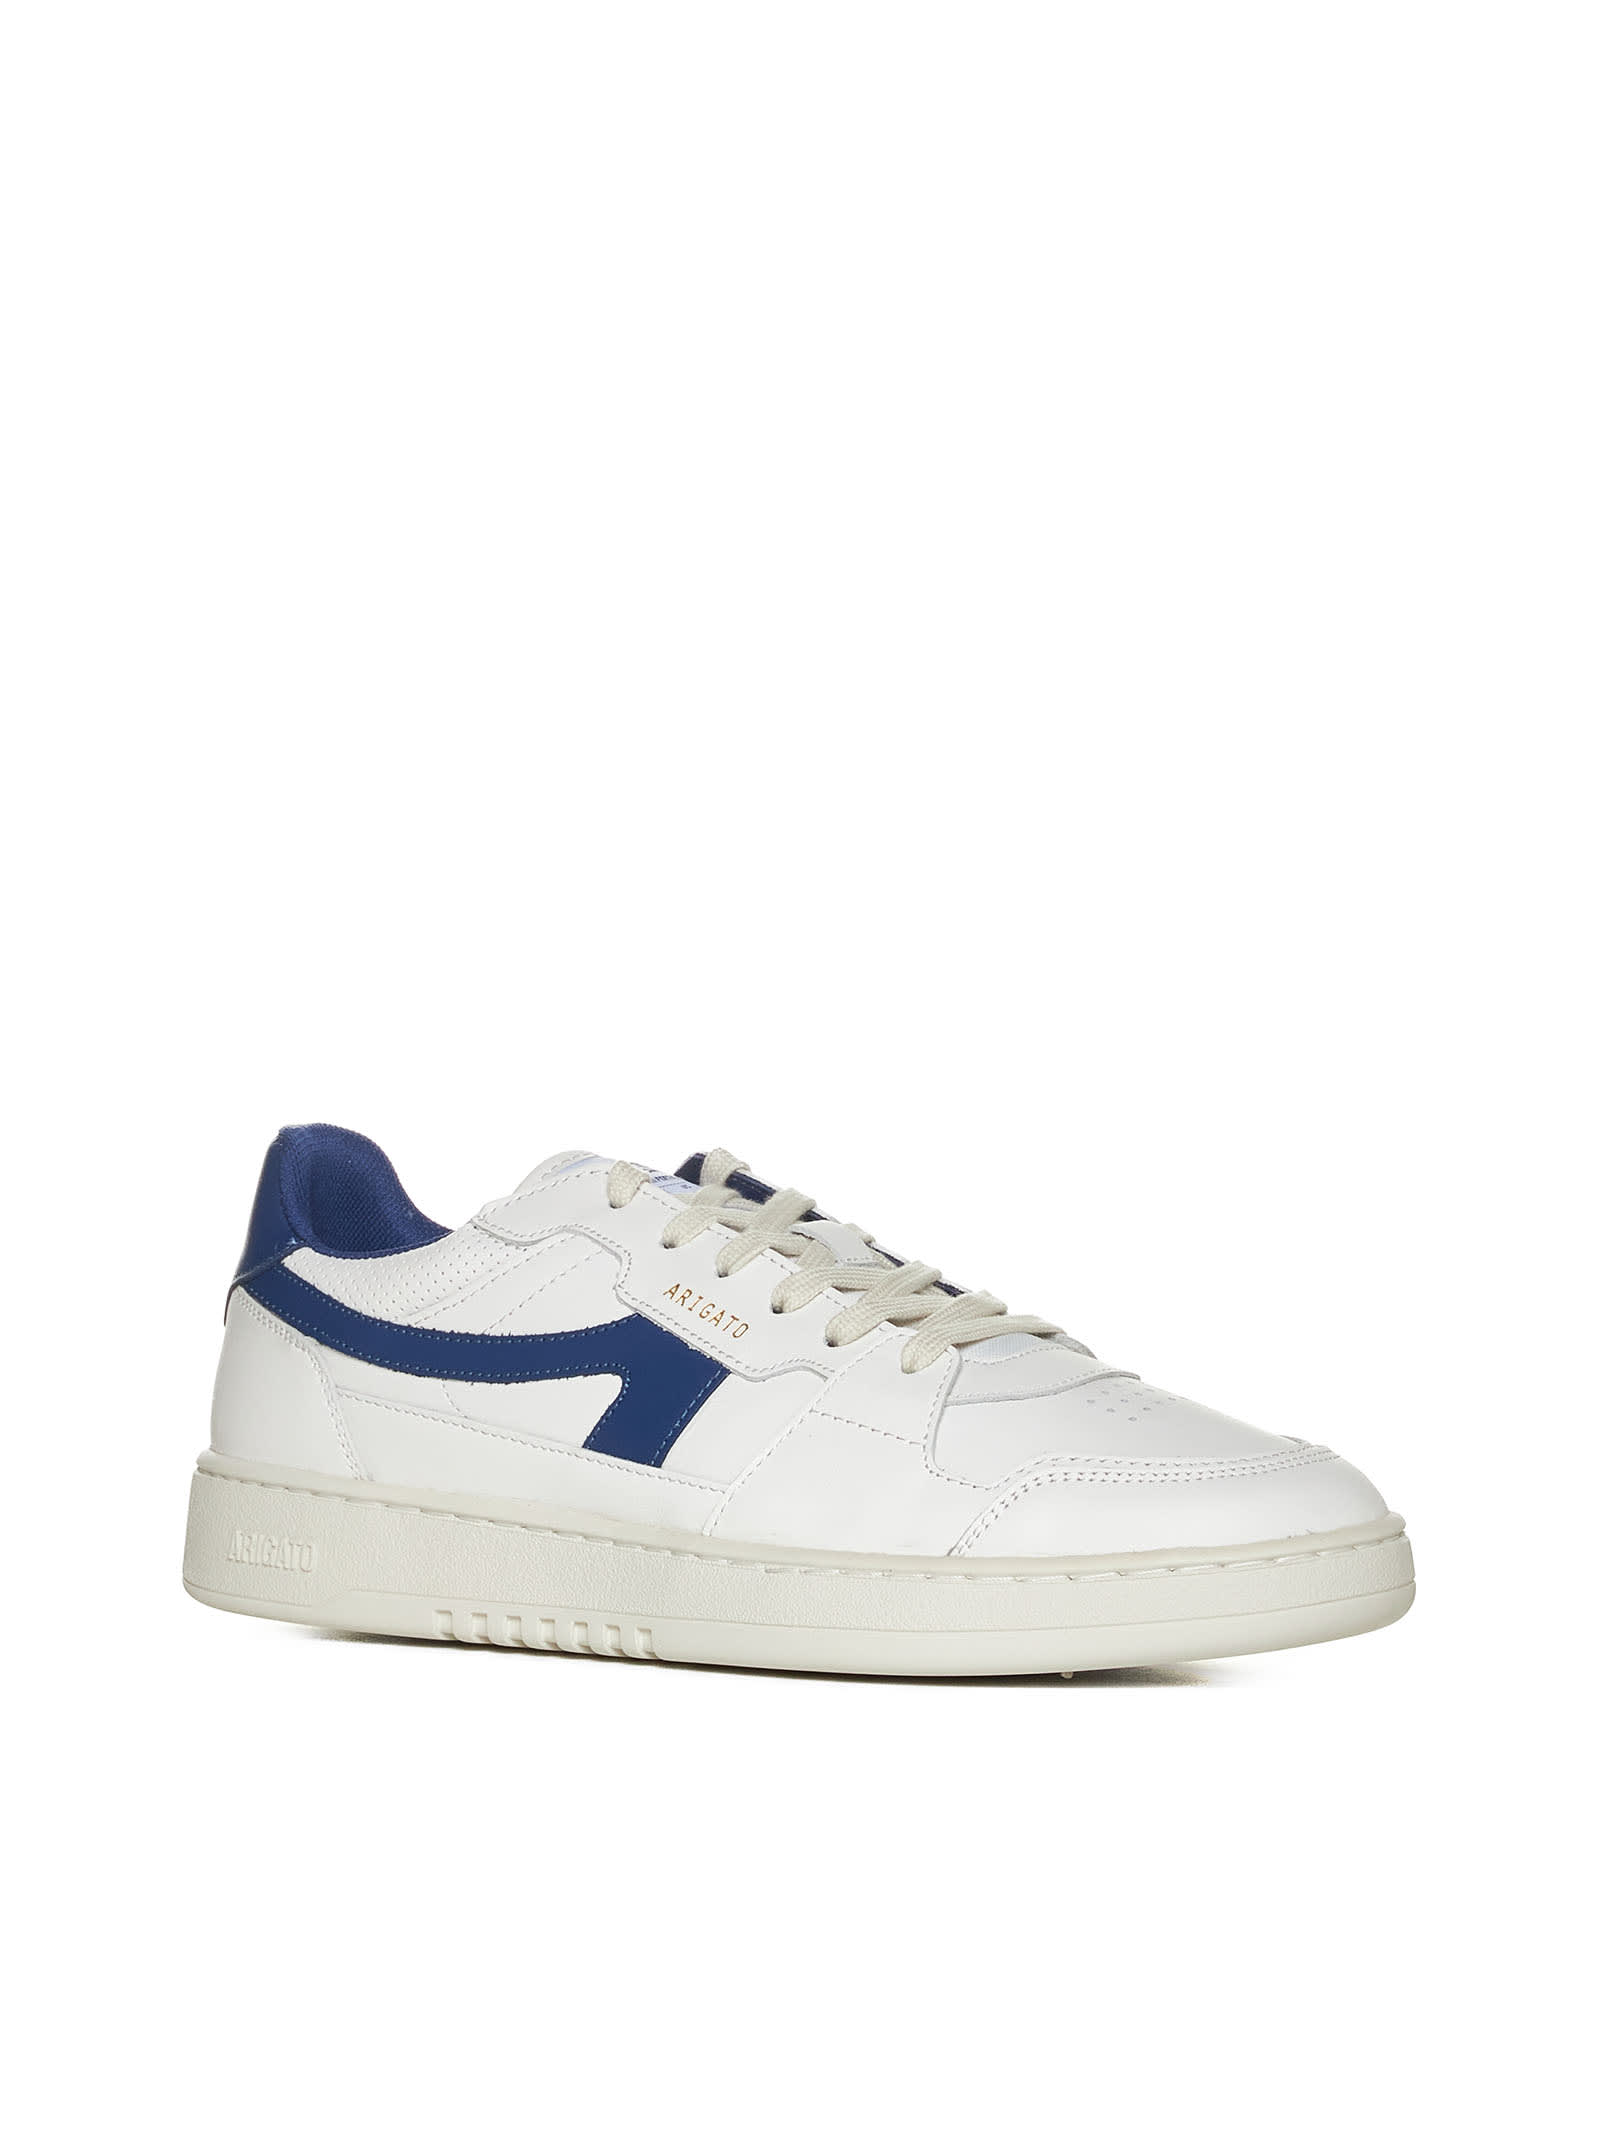 Shop Axel Arigato Sneakers In White / Blue